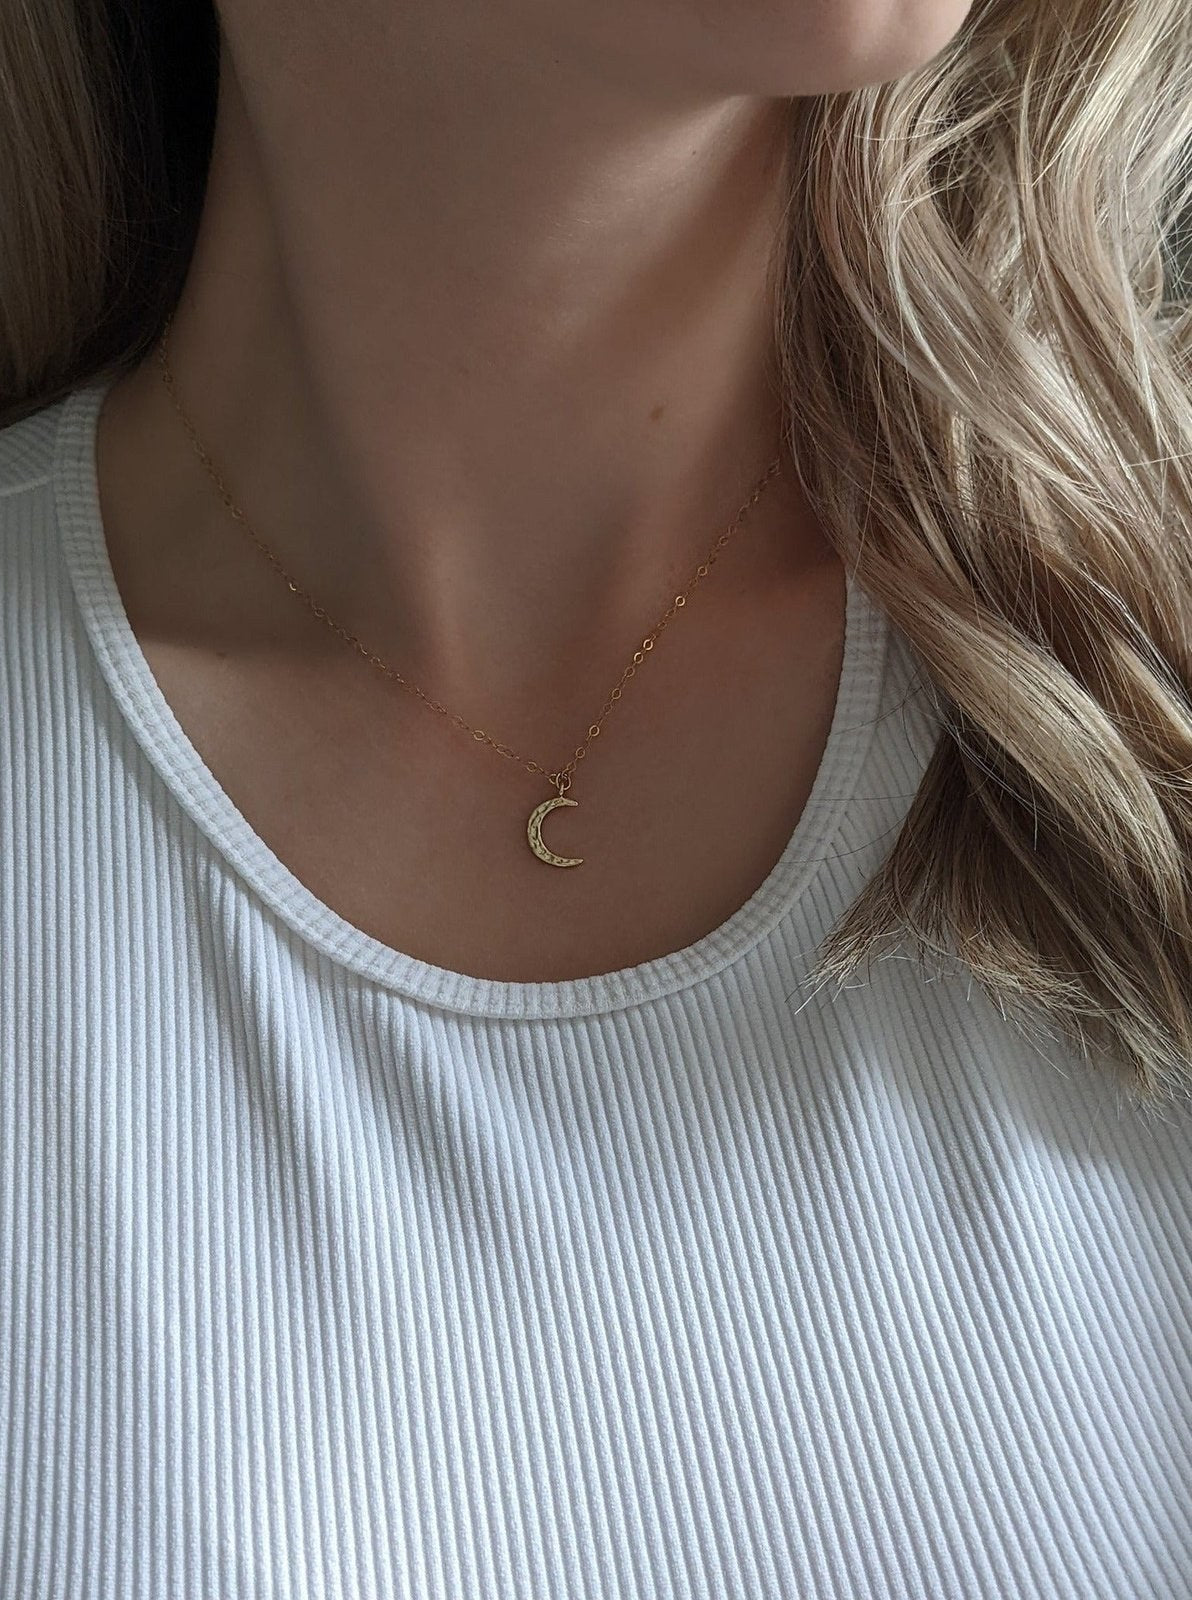 MOON PHASES NECKLACE / CRESCENT MOON – SeaworthyPDX